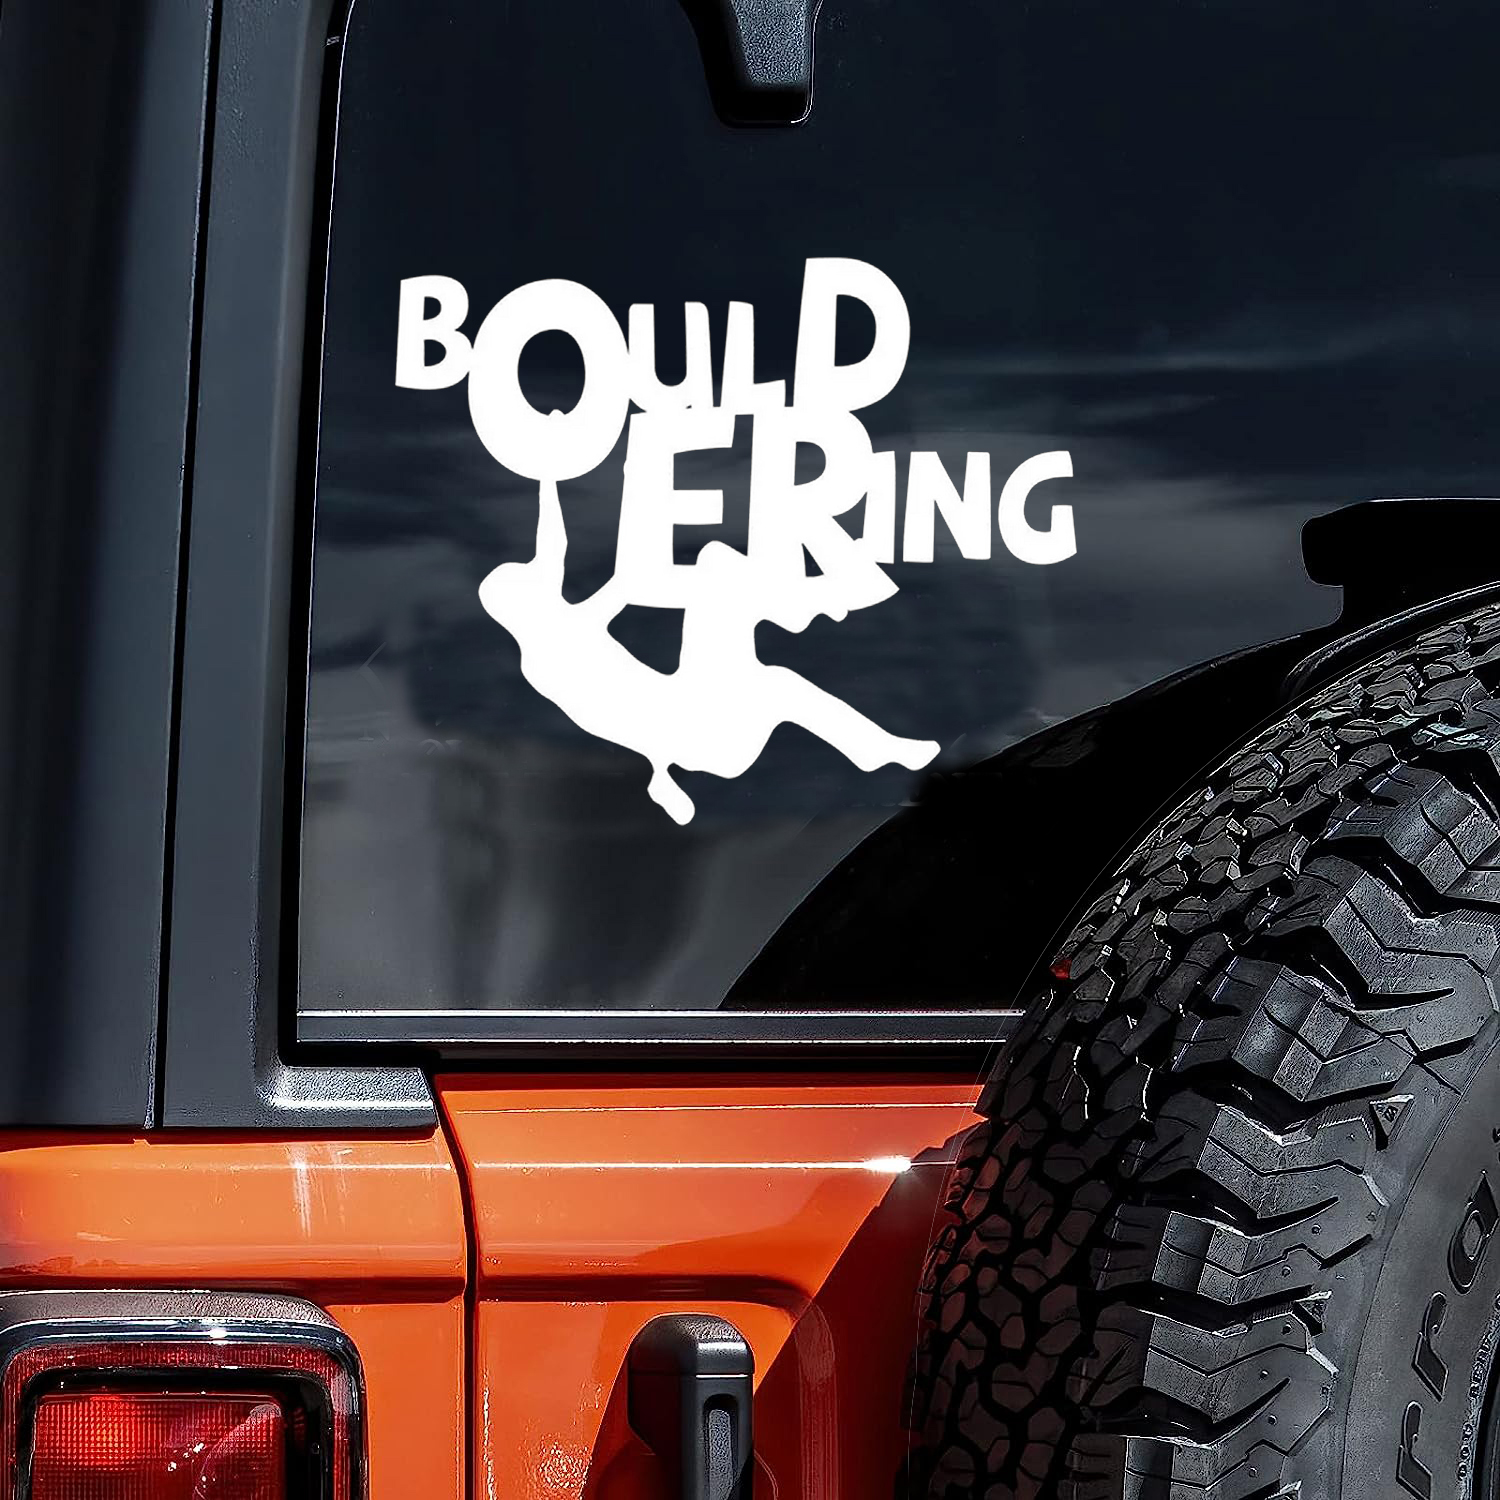 1pc Bouldering Climber Car Sticker For Laptop Bottle Truck Phone Motorcycle  SUV Vehicle Window Wall Cup Fishing Boat Skateboard Decal